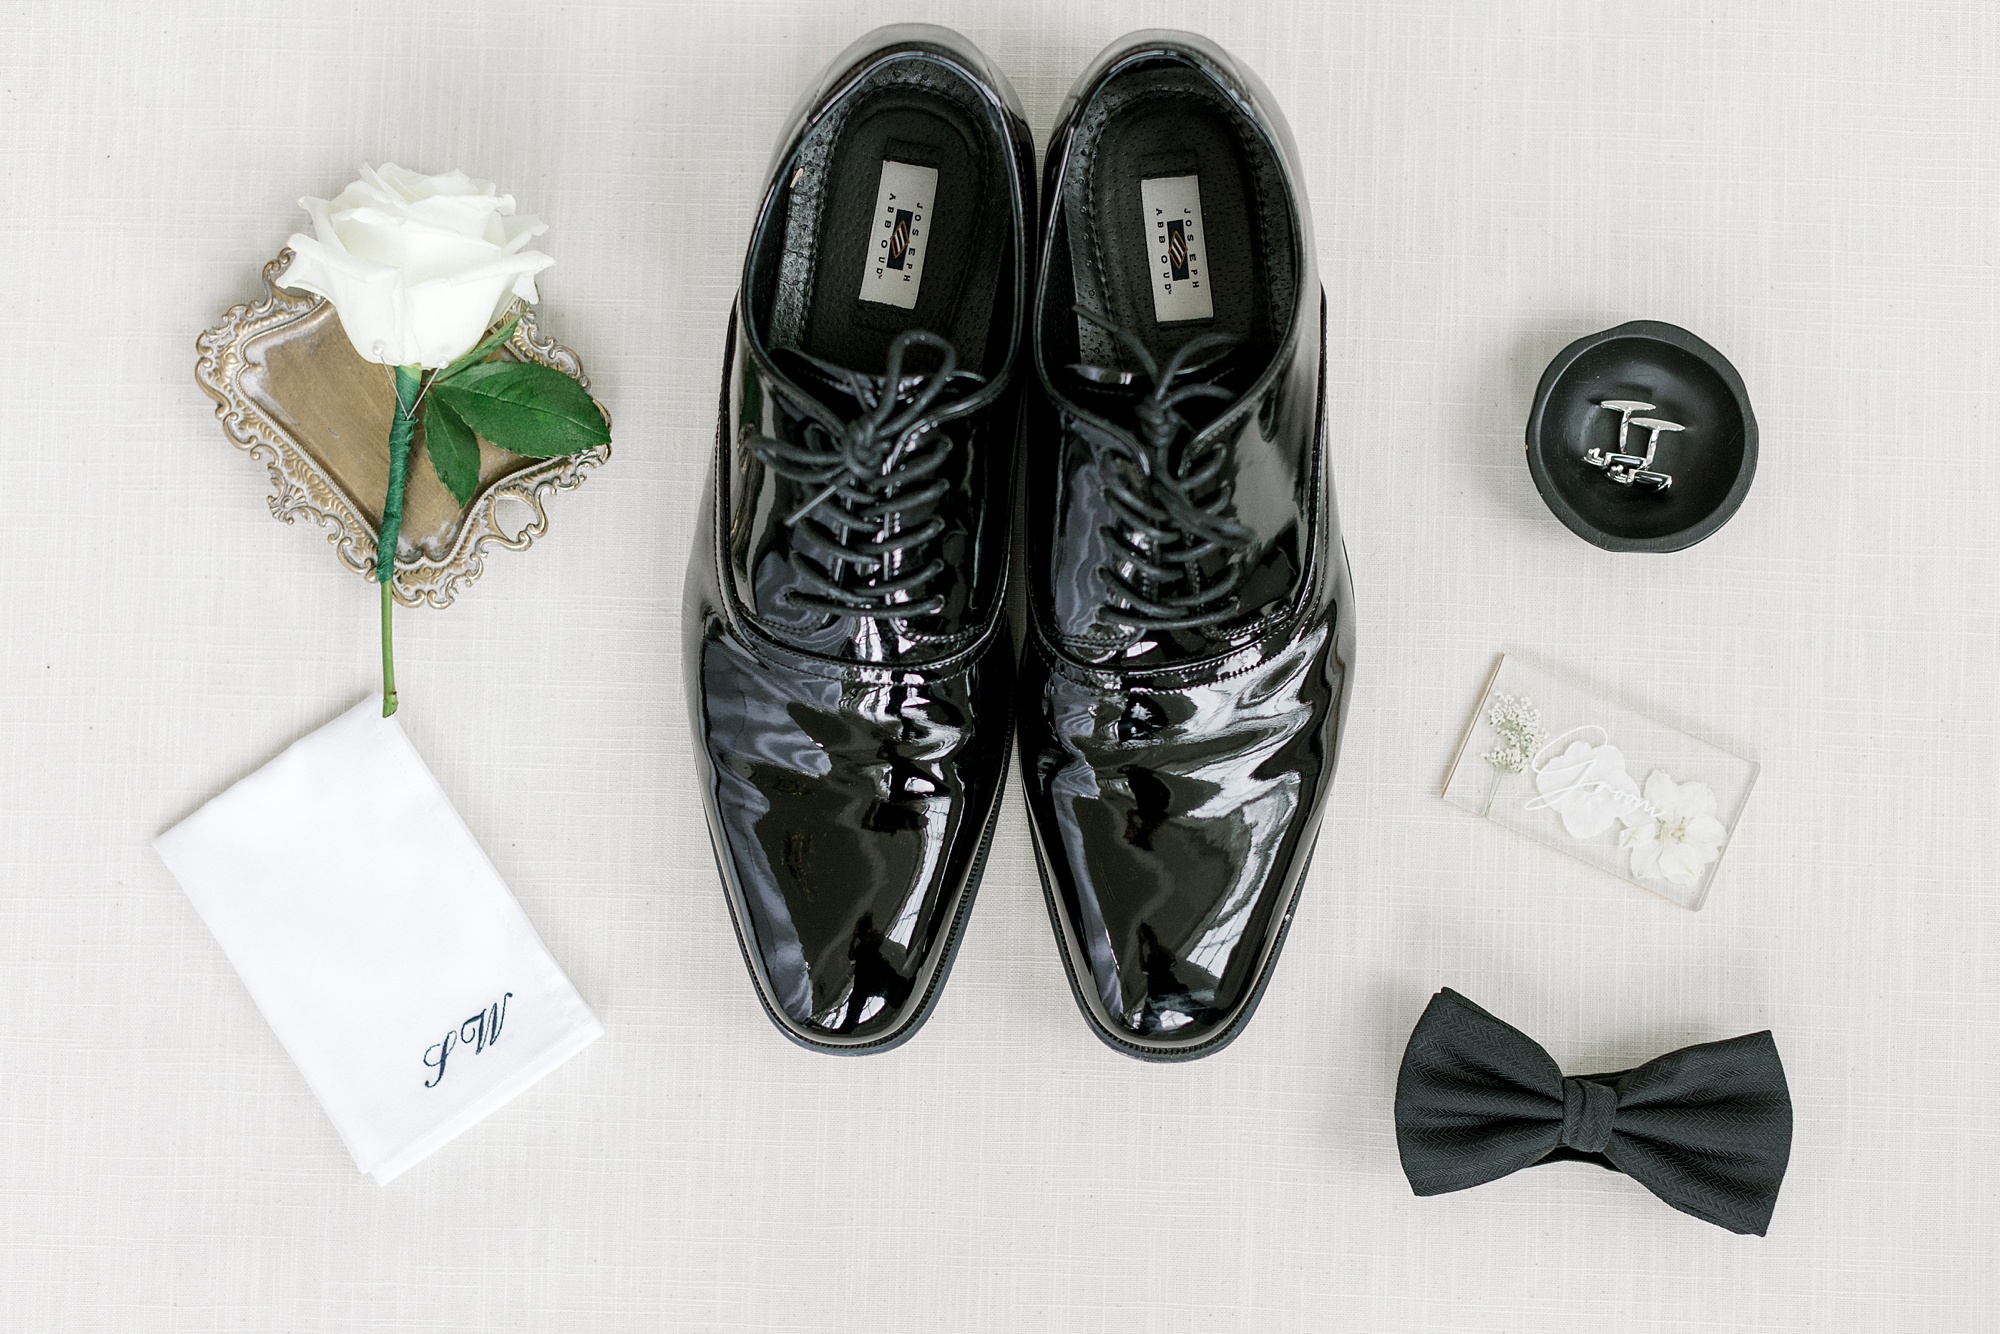 groom's black shoes, white boutonnière, and black bow tie